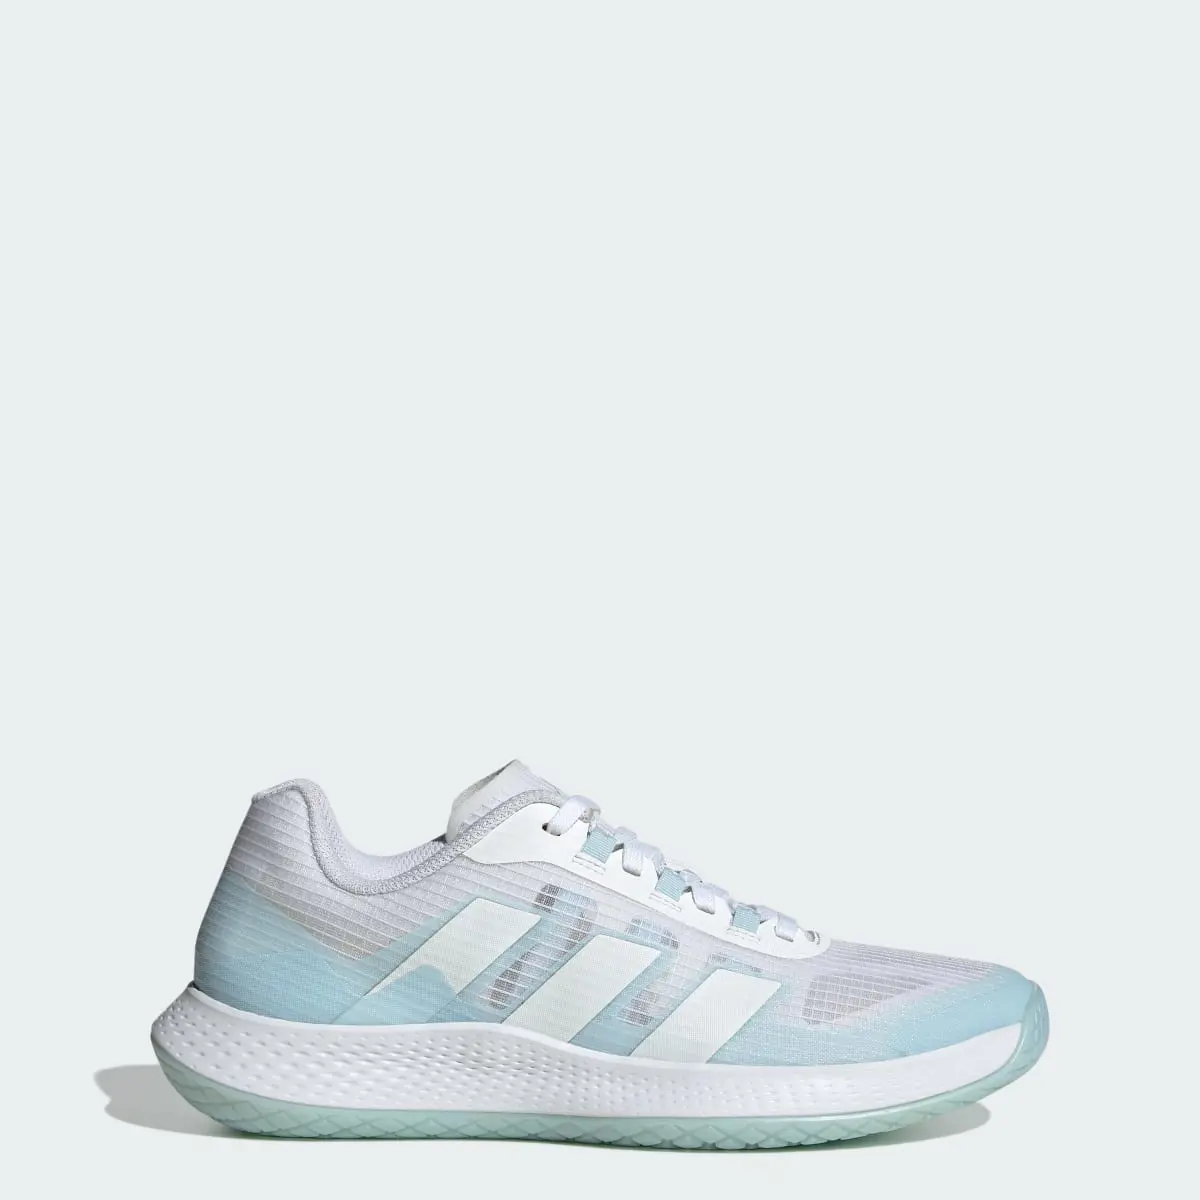 Adidas Forcebounce Volleyball Schuh. 1